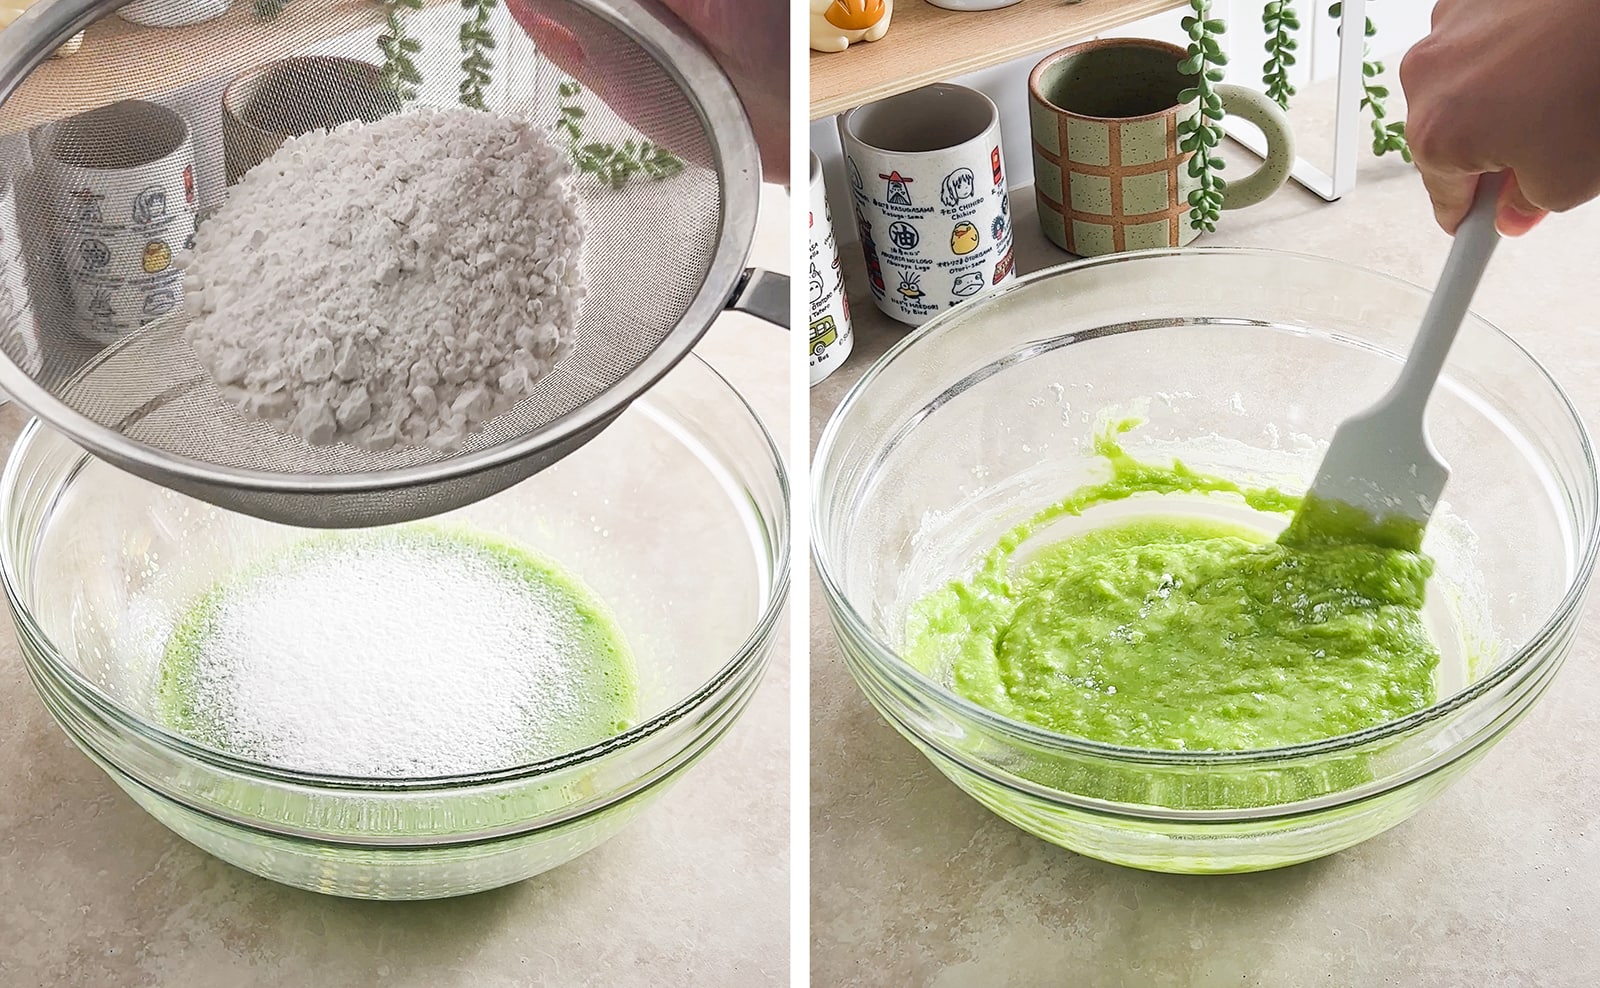 Left to right: sifting flour into bowl of batter, folding pandan batter with a spatula.